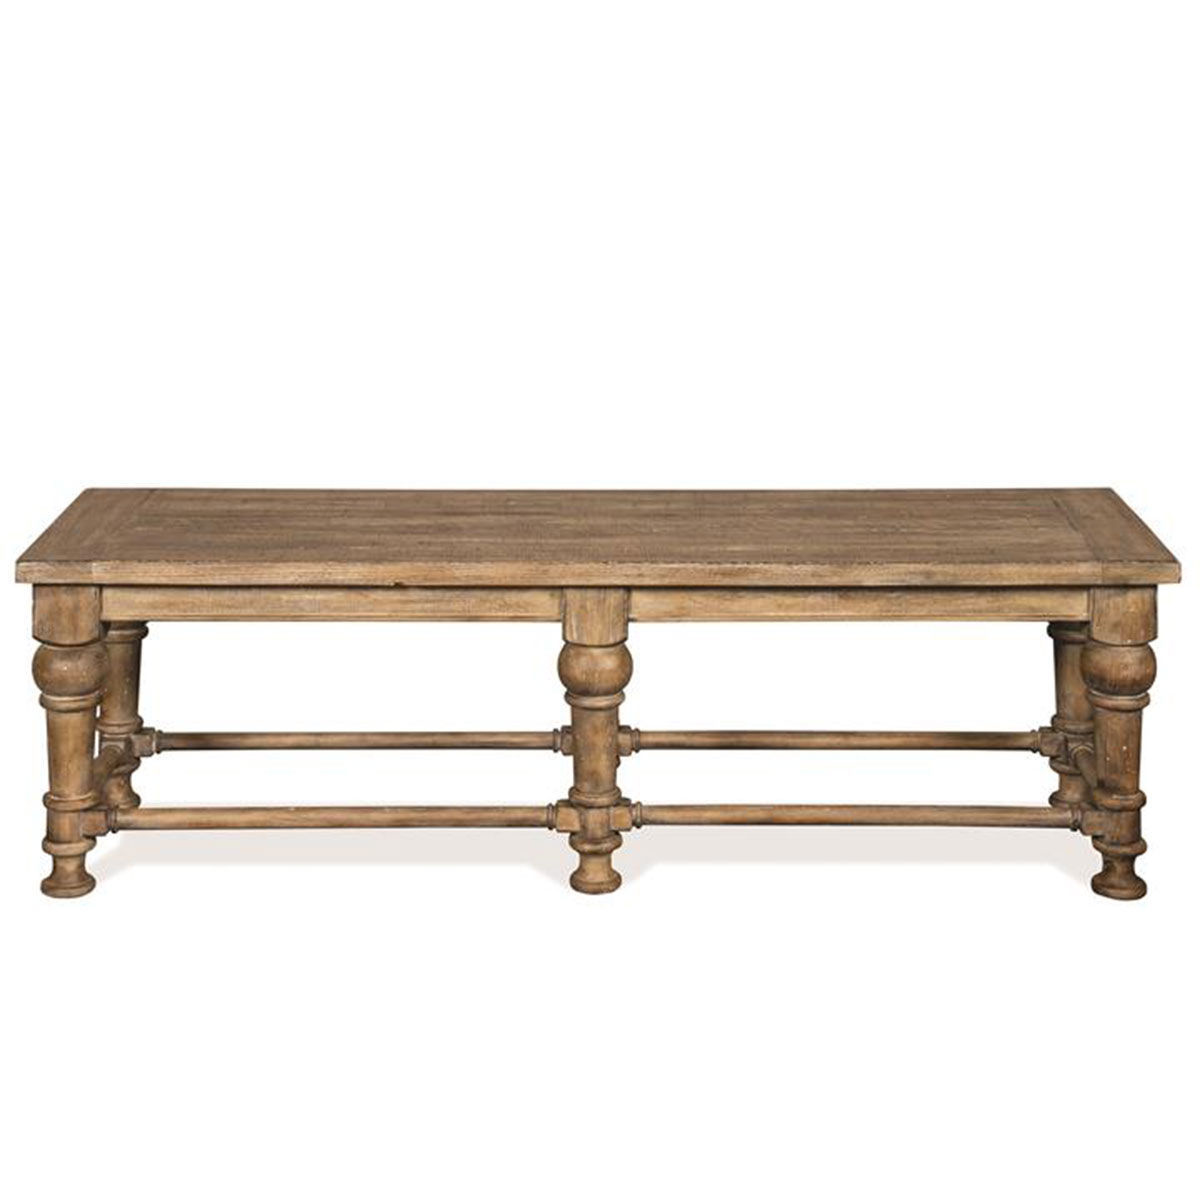 Picture of SONORA DINING BENCH